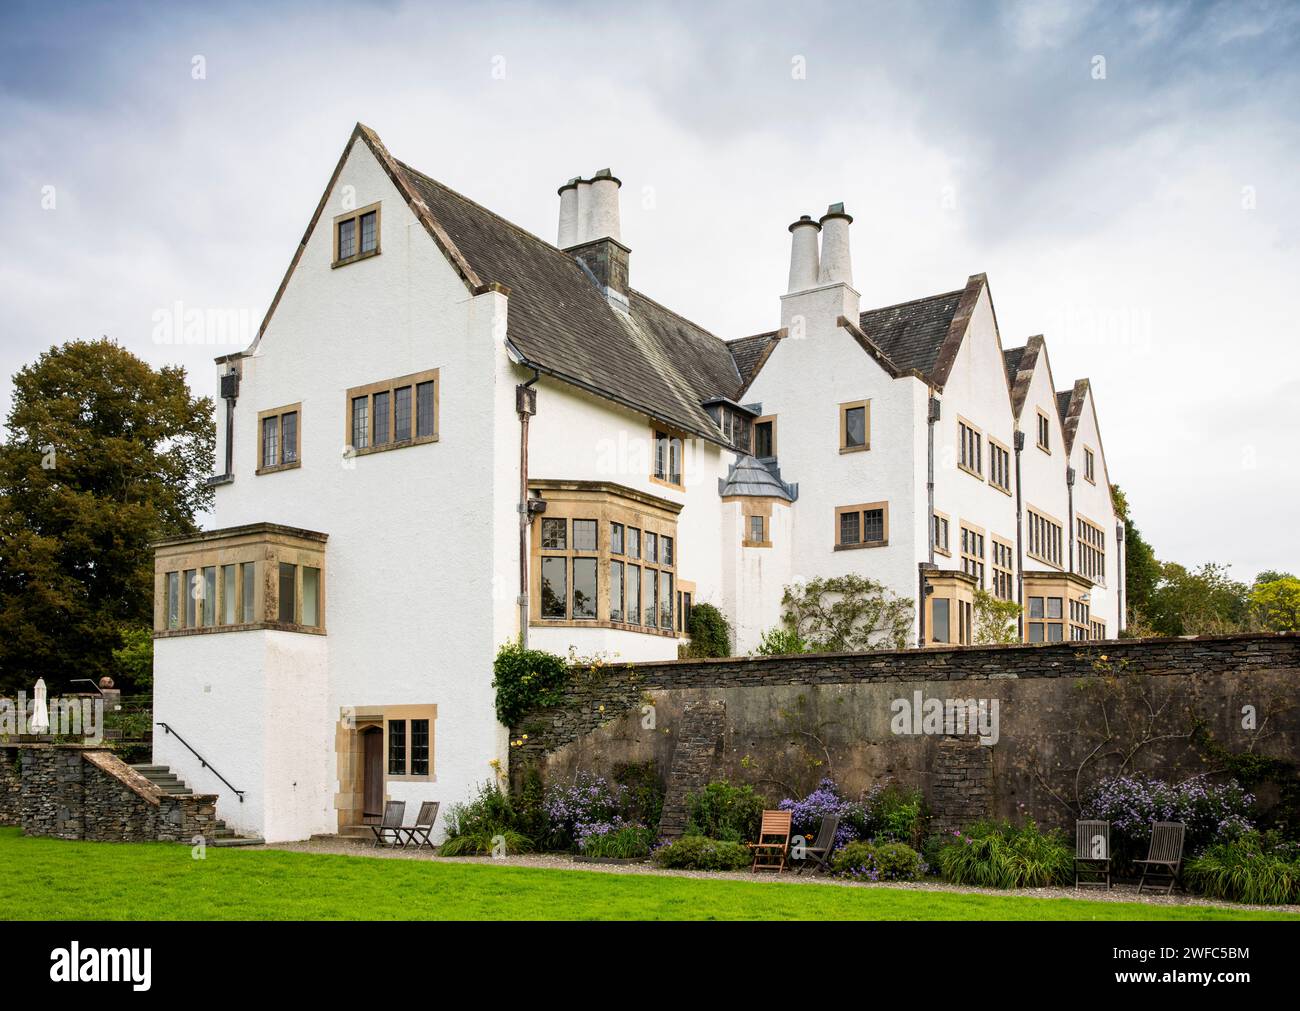 UK, Cumbria, Bowness on Windermere, Blackwell, Arts and Crafts House by Baillie Scott, Außenansicht Stockfoto